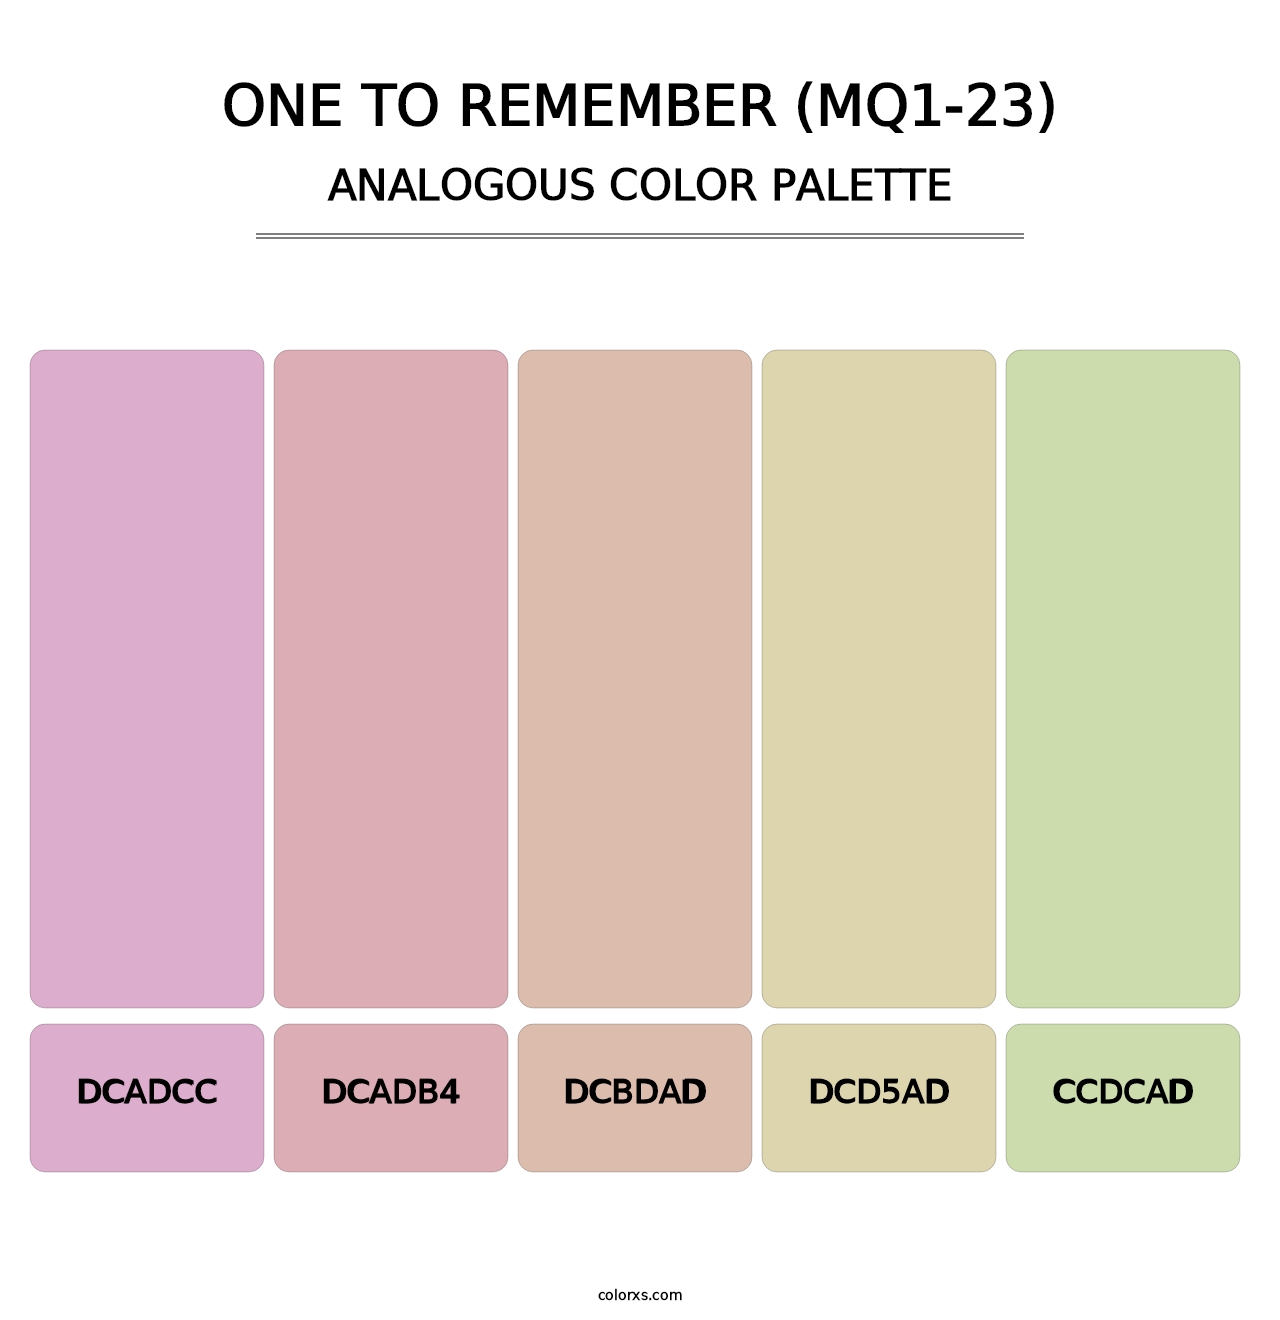 One To Remember (MQ1-23) - Analogous Color Palette